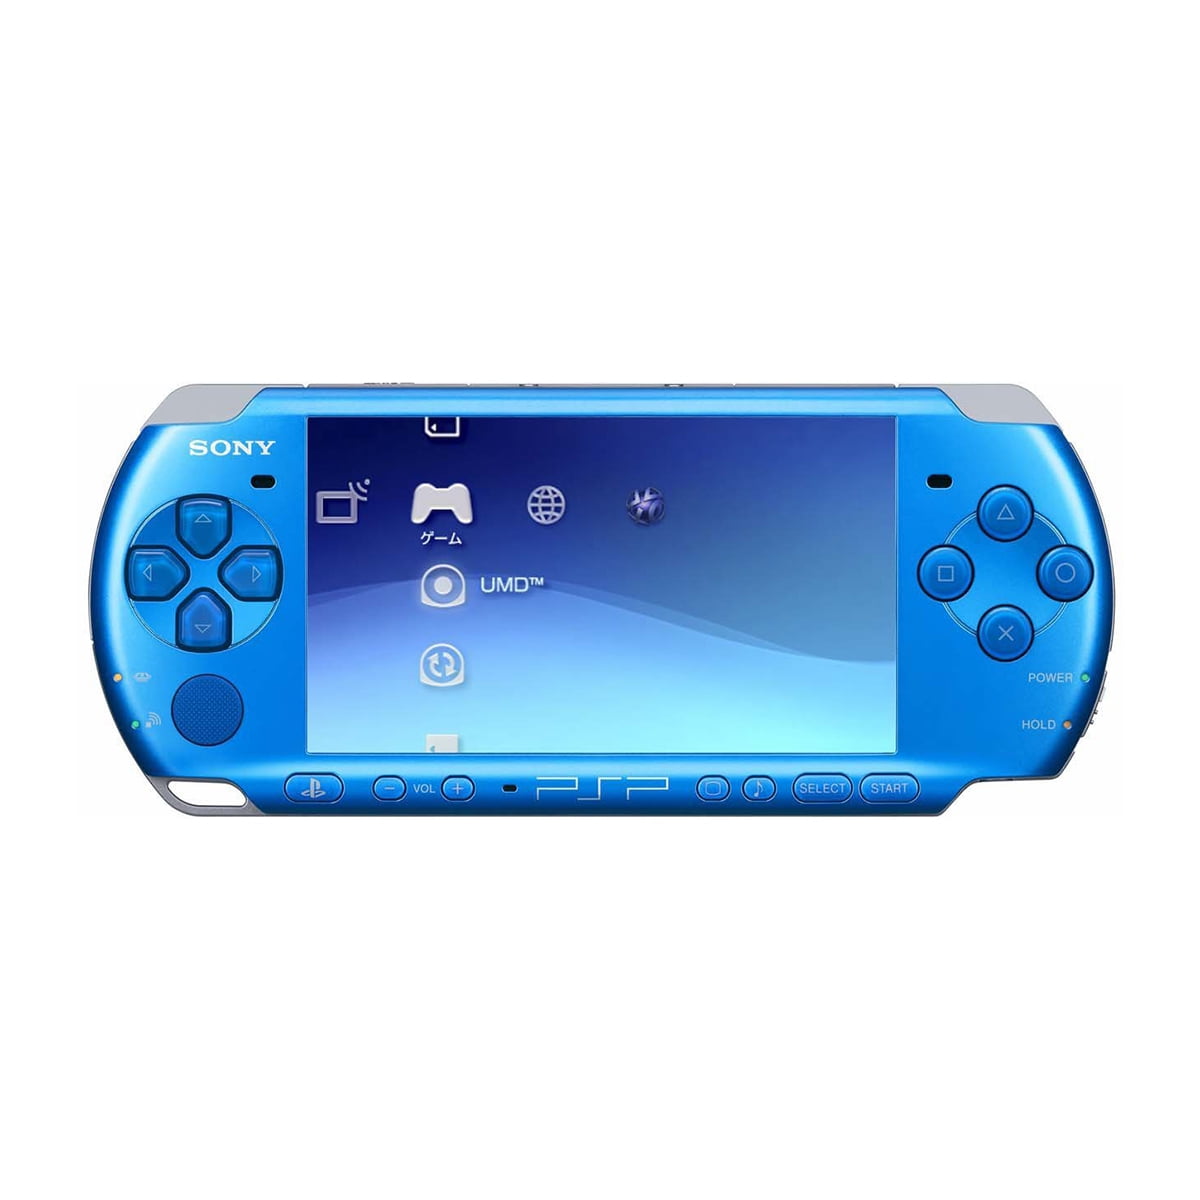 Sony Playstation Portable PSP 3000 Series Handheld Gaming Console System  (Black) (Renewed)